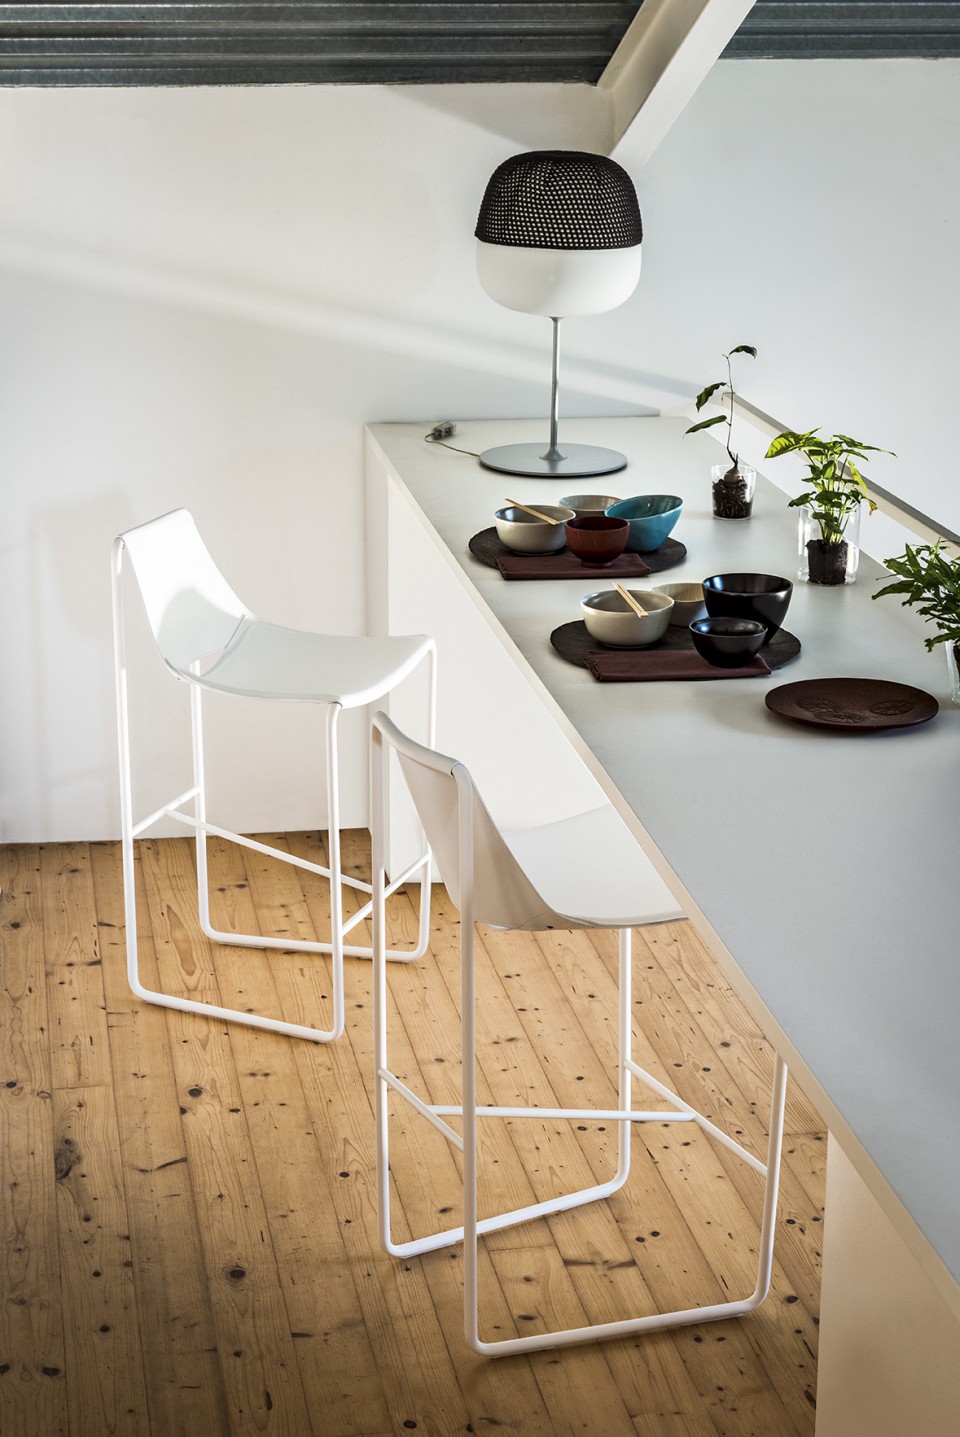 Apelle stool in white hide with white metal legs